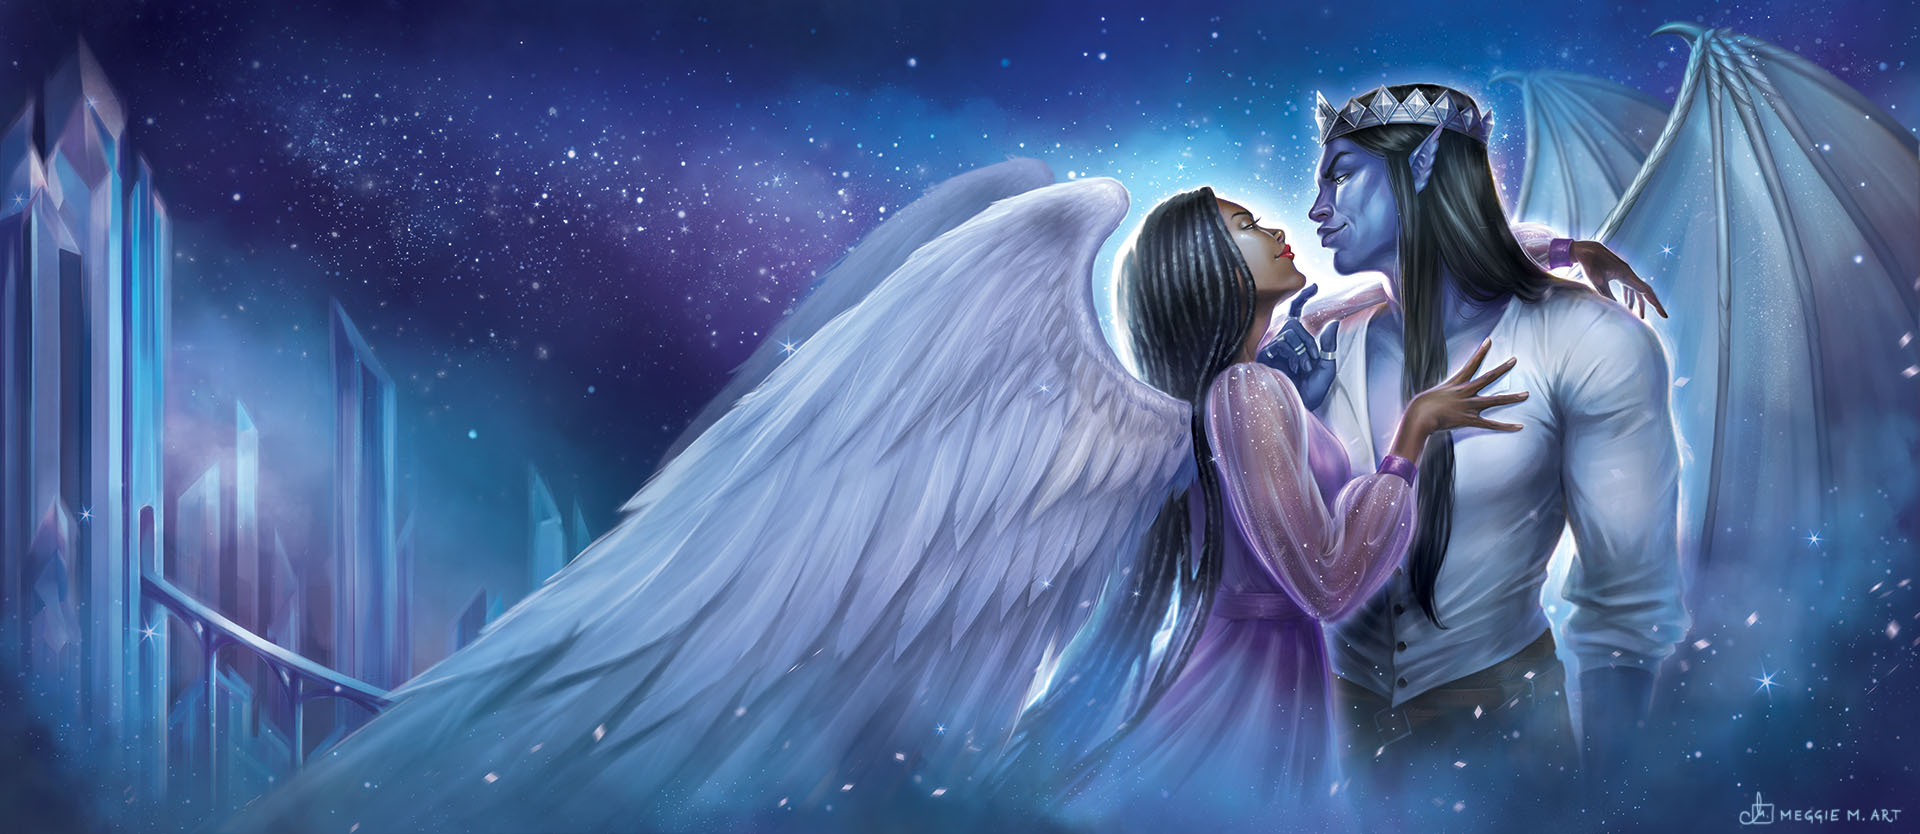 illustration for book cover Barbarian of the starts. Angels in romantic pose looking at each other in magic sparkling background